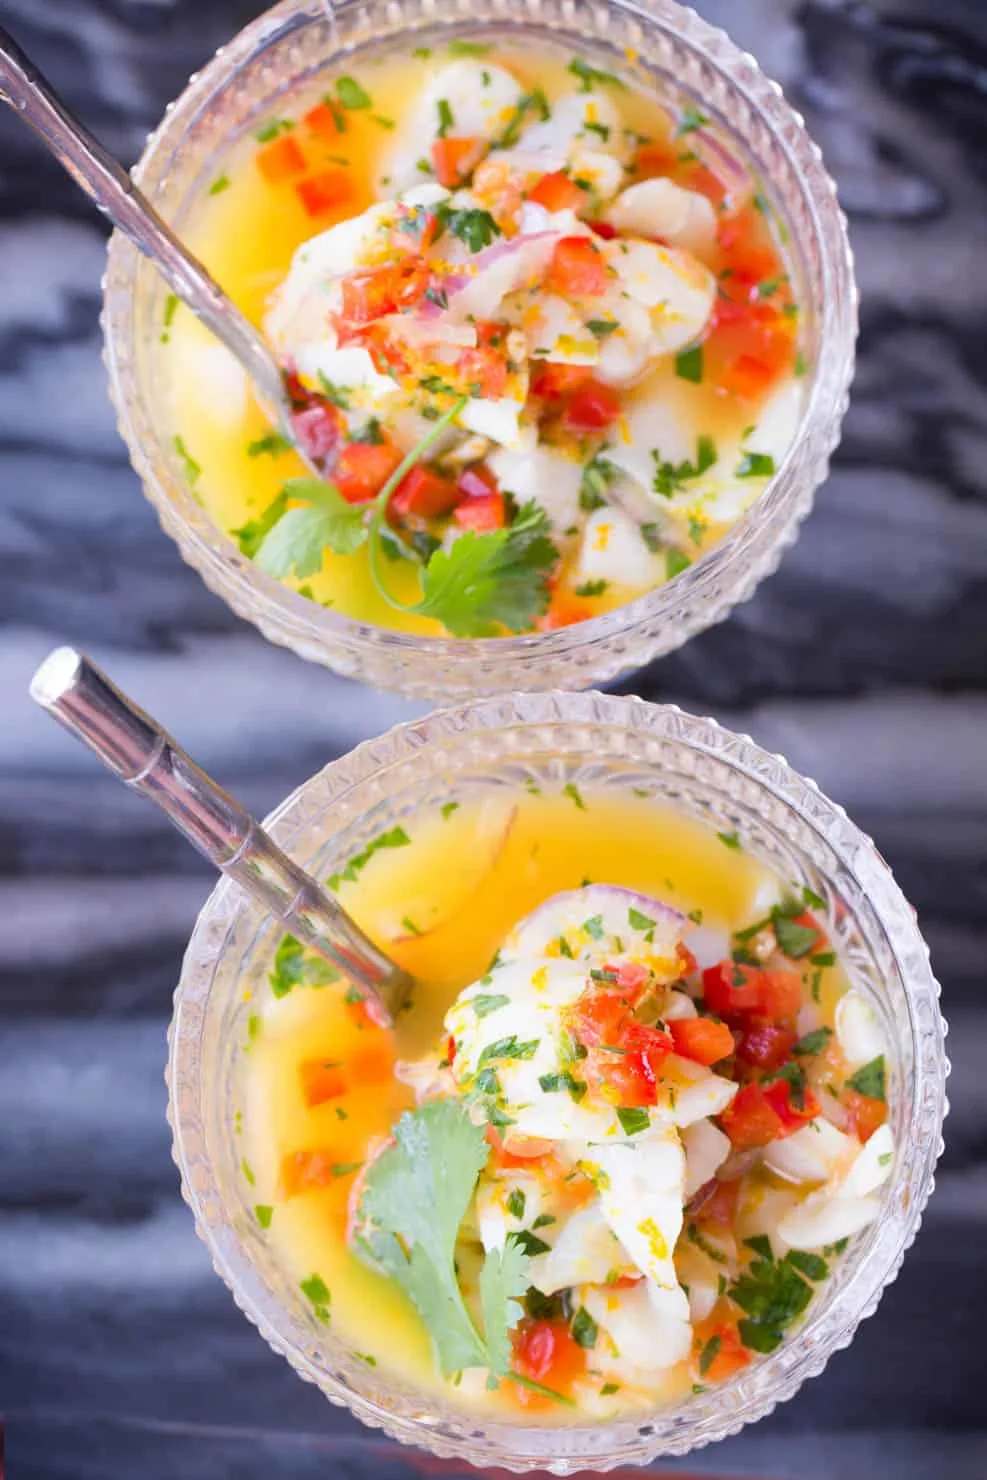 Sea Scallop Ceviche from above with colorful fruits and vegetables